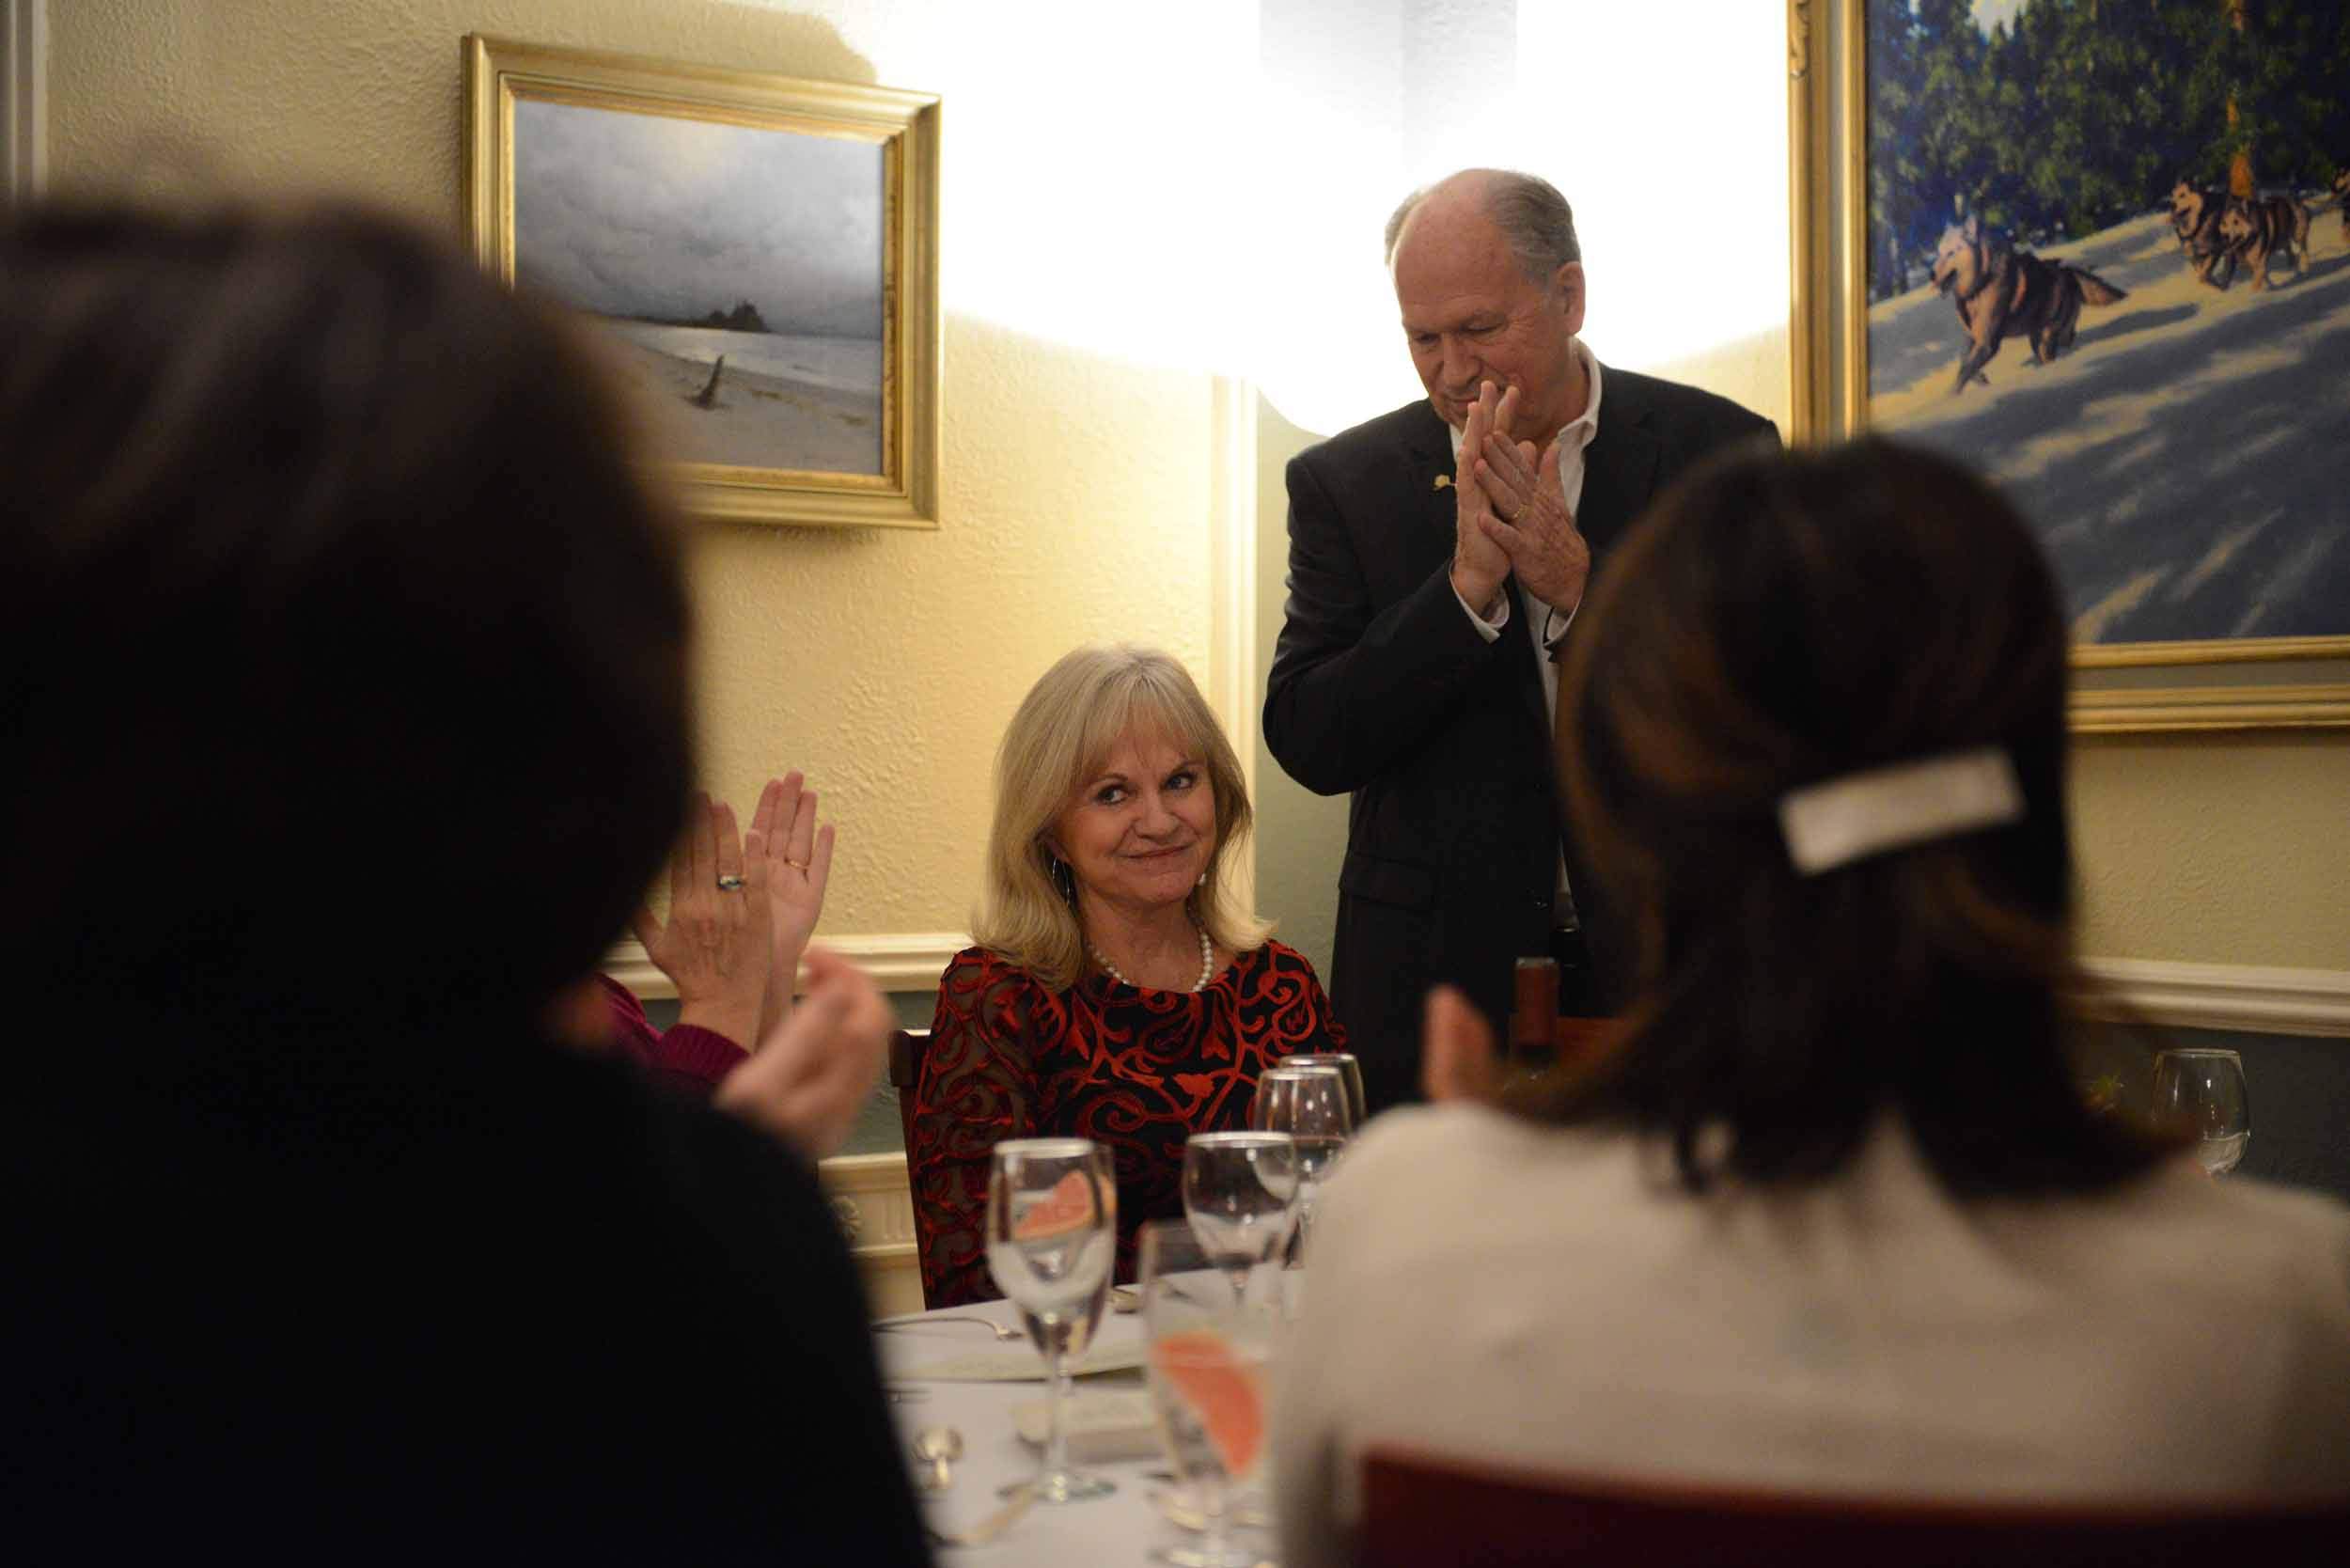  At a speech during a private dinner at the Governor’s Mansion at the end of Governor Walker’s term, senior staff and administration officials applaud First Lady Donna Walker. November 12, 2018. 